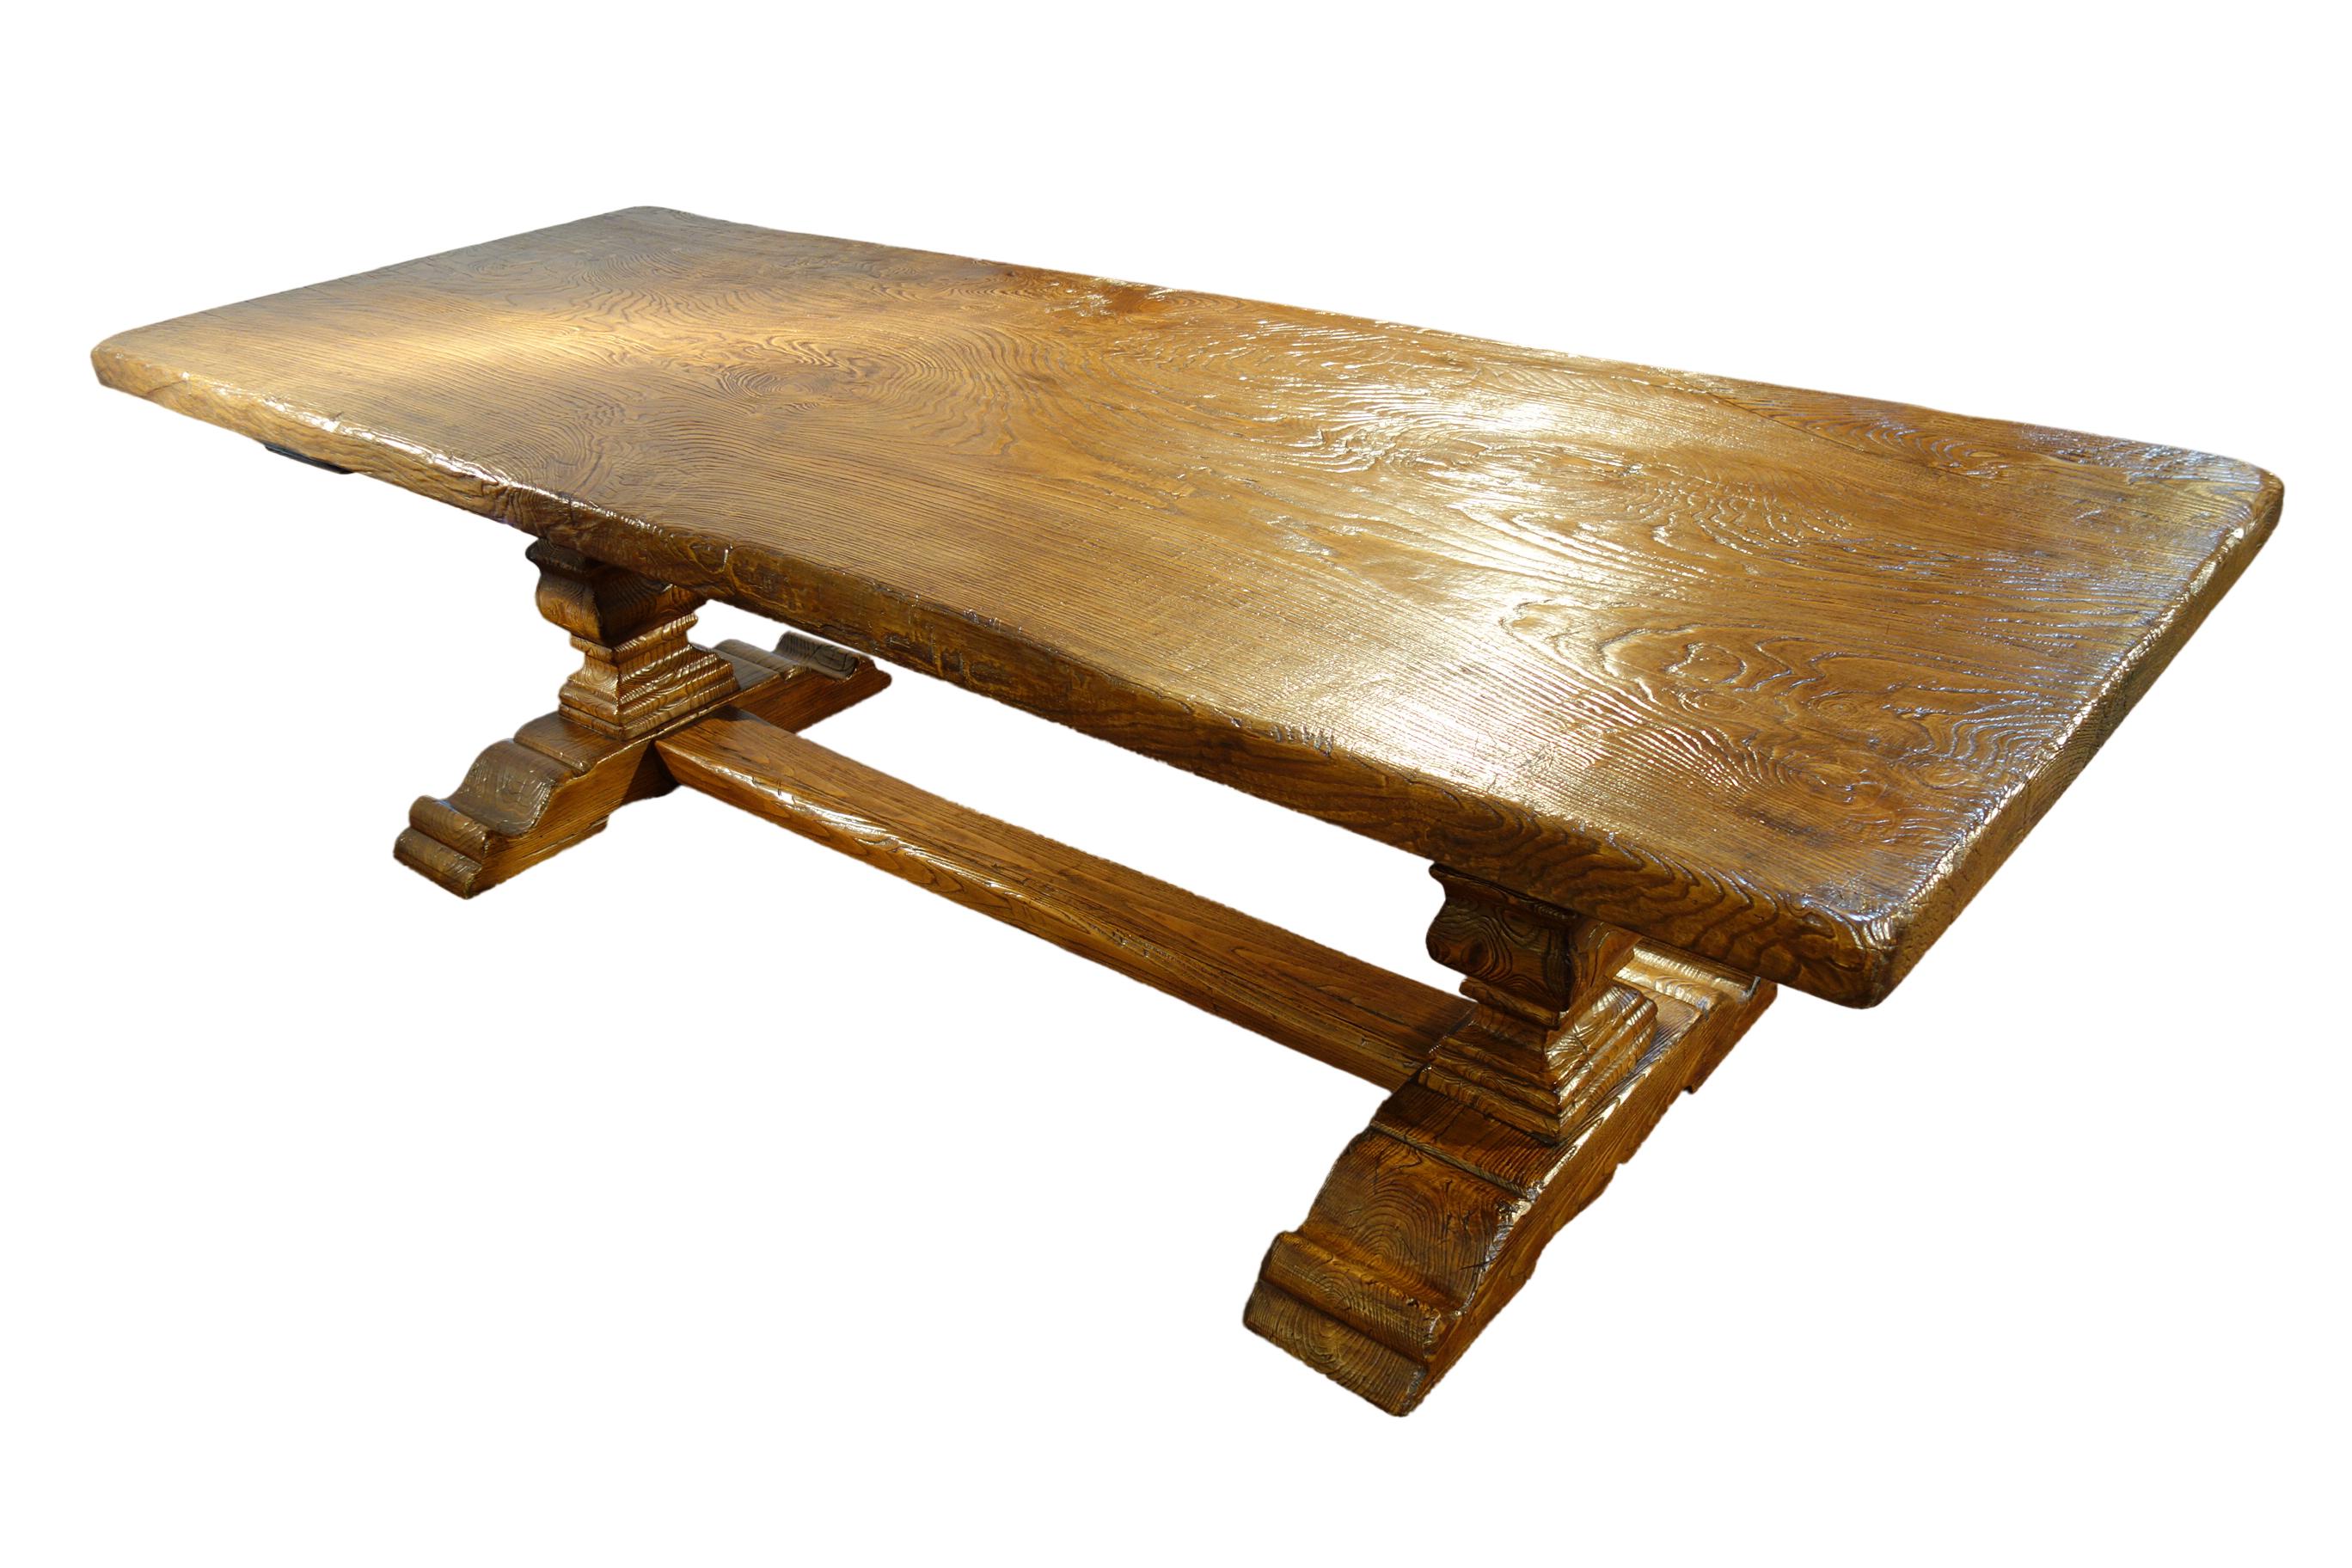 Hand-Crafted 17th C Style Italian Solid Slab Chestnut Trestle Table Made to Order For Sale